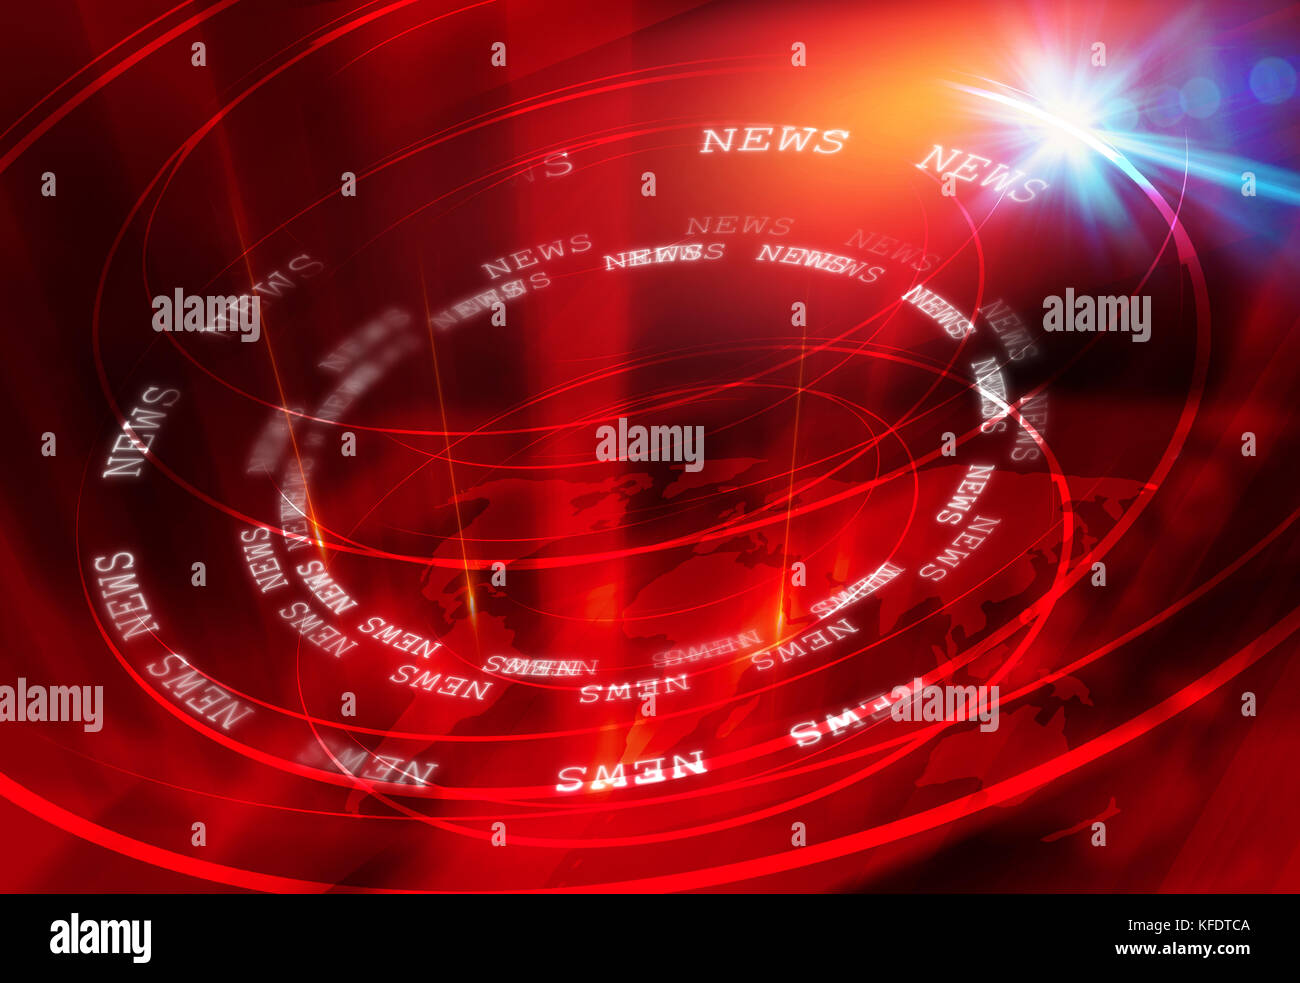 Graphical Modern Studio News Background Suitable For Internet And Tv News Multiple Round Circle Around The Earth Map With Lens Flare Effect Stock Photo Alamy